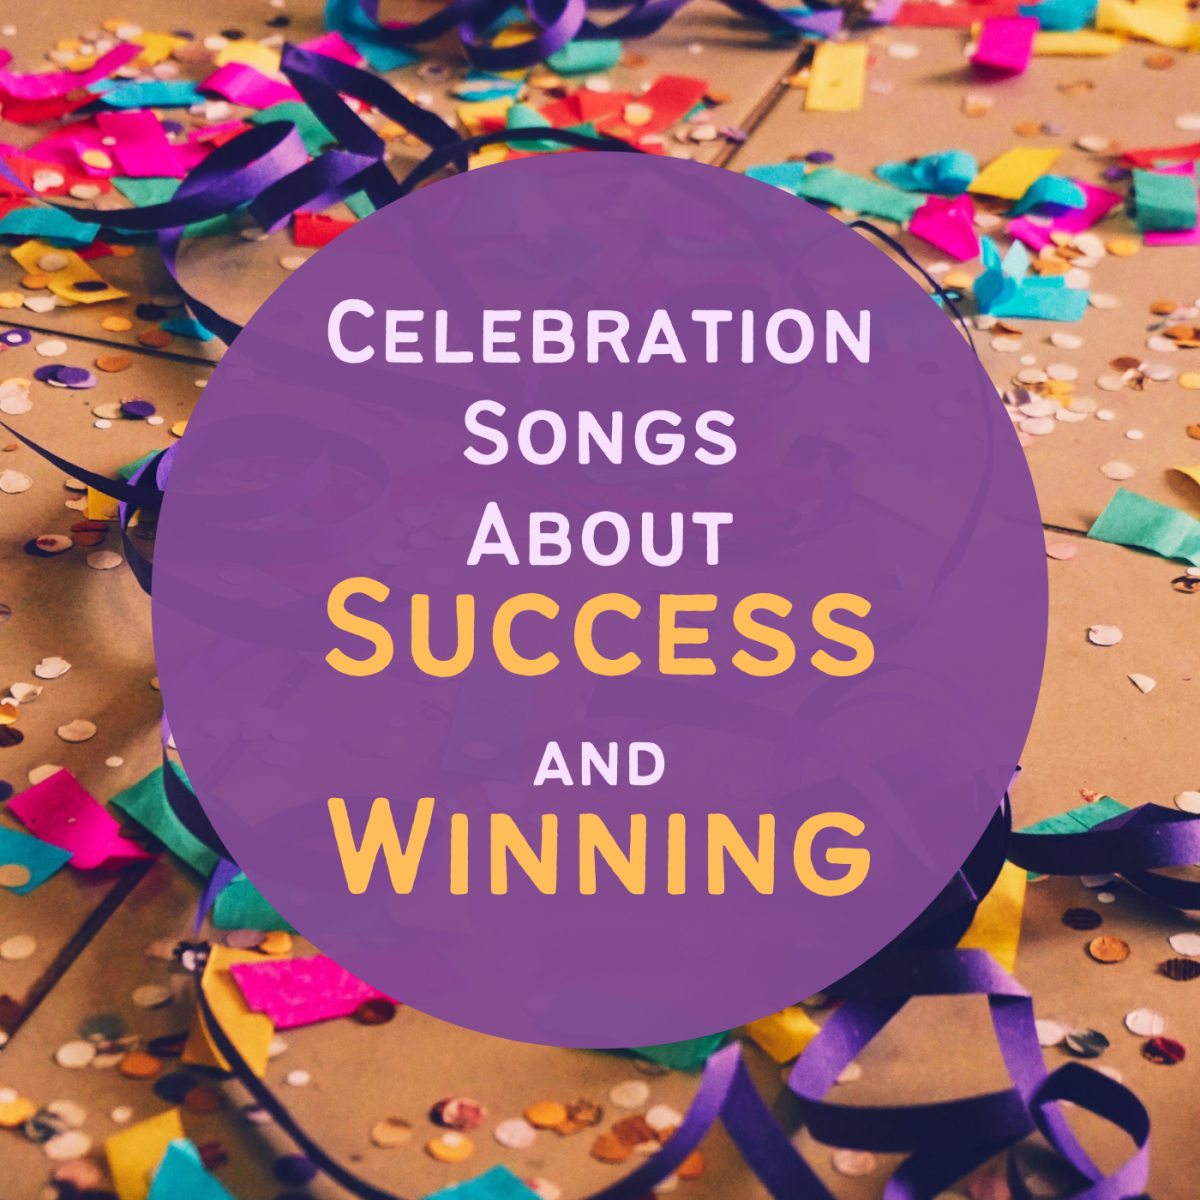 116 Songs About Victory, Celebration, Success, and Winning - Spinditty